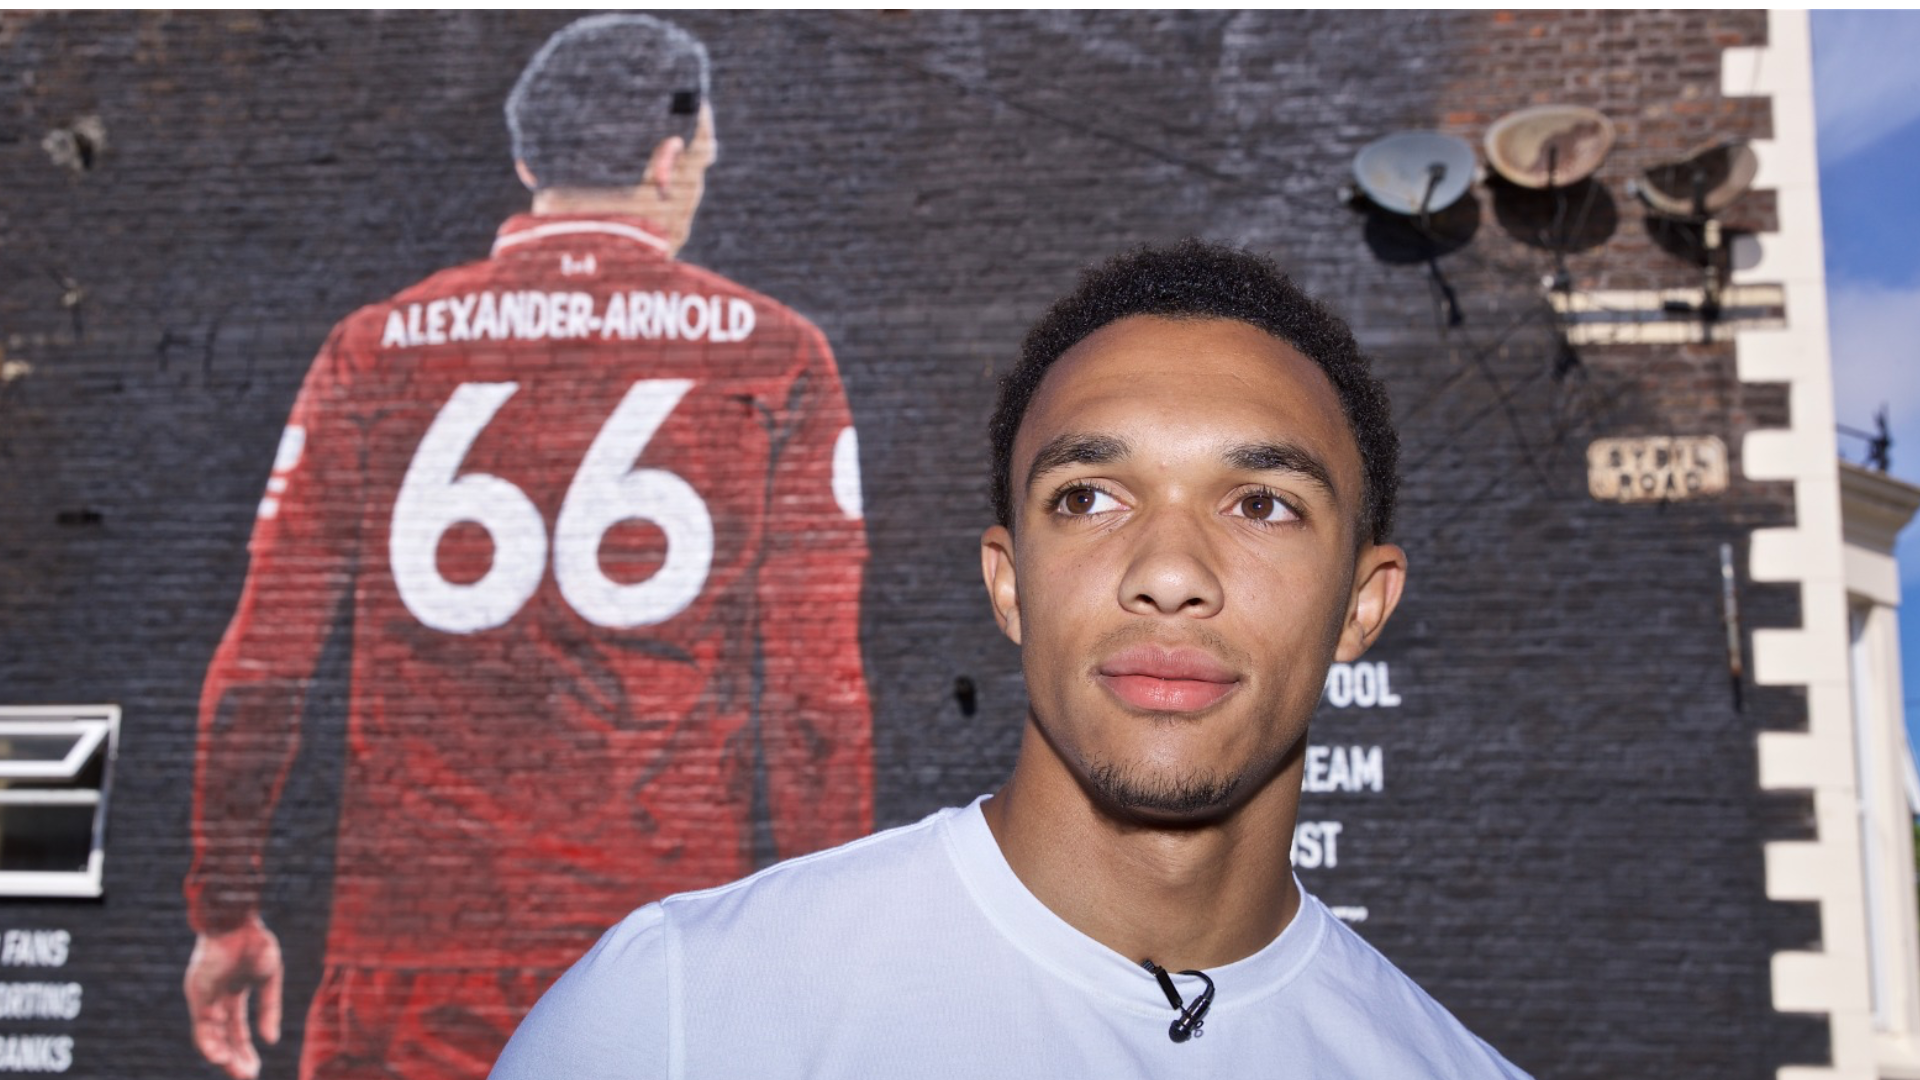 ALEXANDER-ARNOLD 2-18/19 RED ENGLAND WORLD CUP HOME NAME SET = PLAYER SIZE 